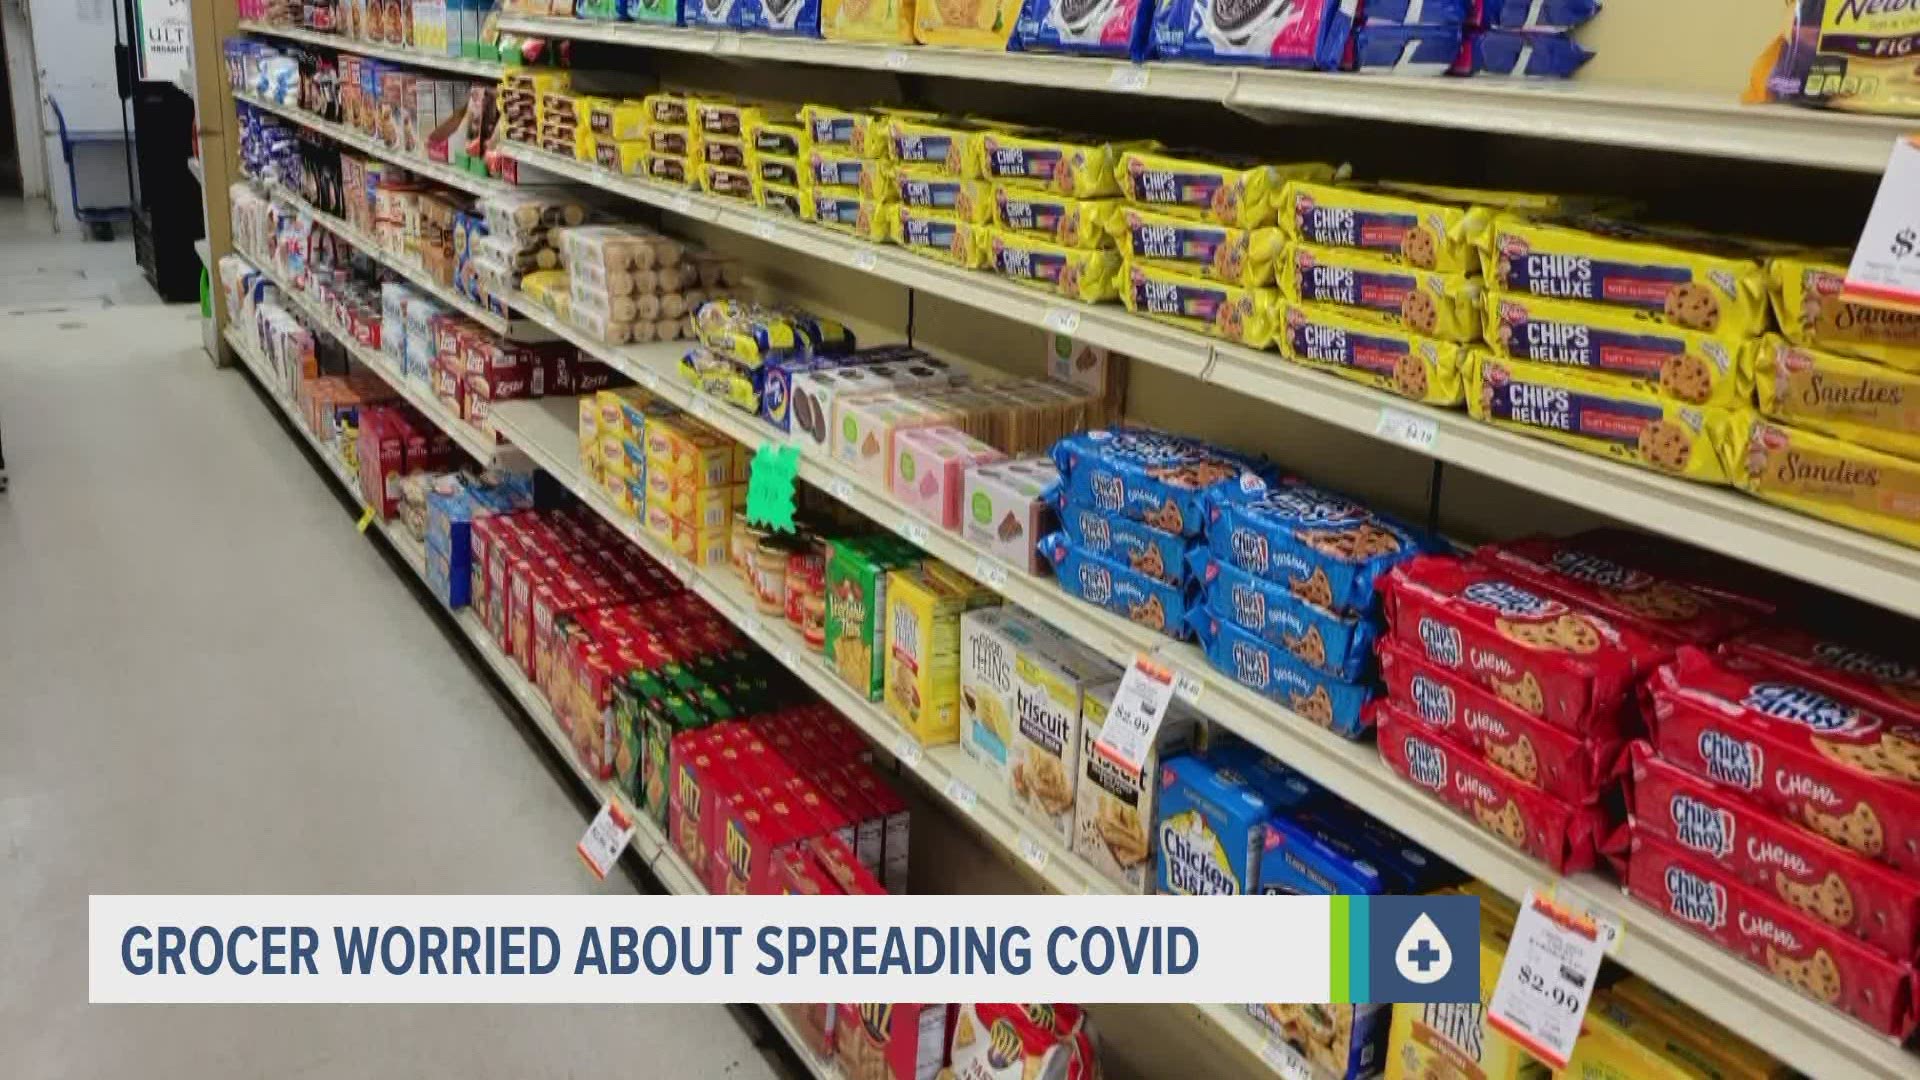 Grocers are not part of Phase 1B of the COVID vaccine, even though the CDC says they should be.